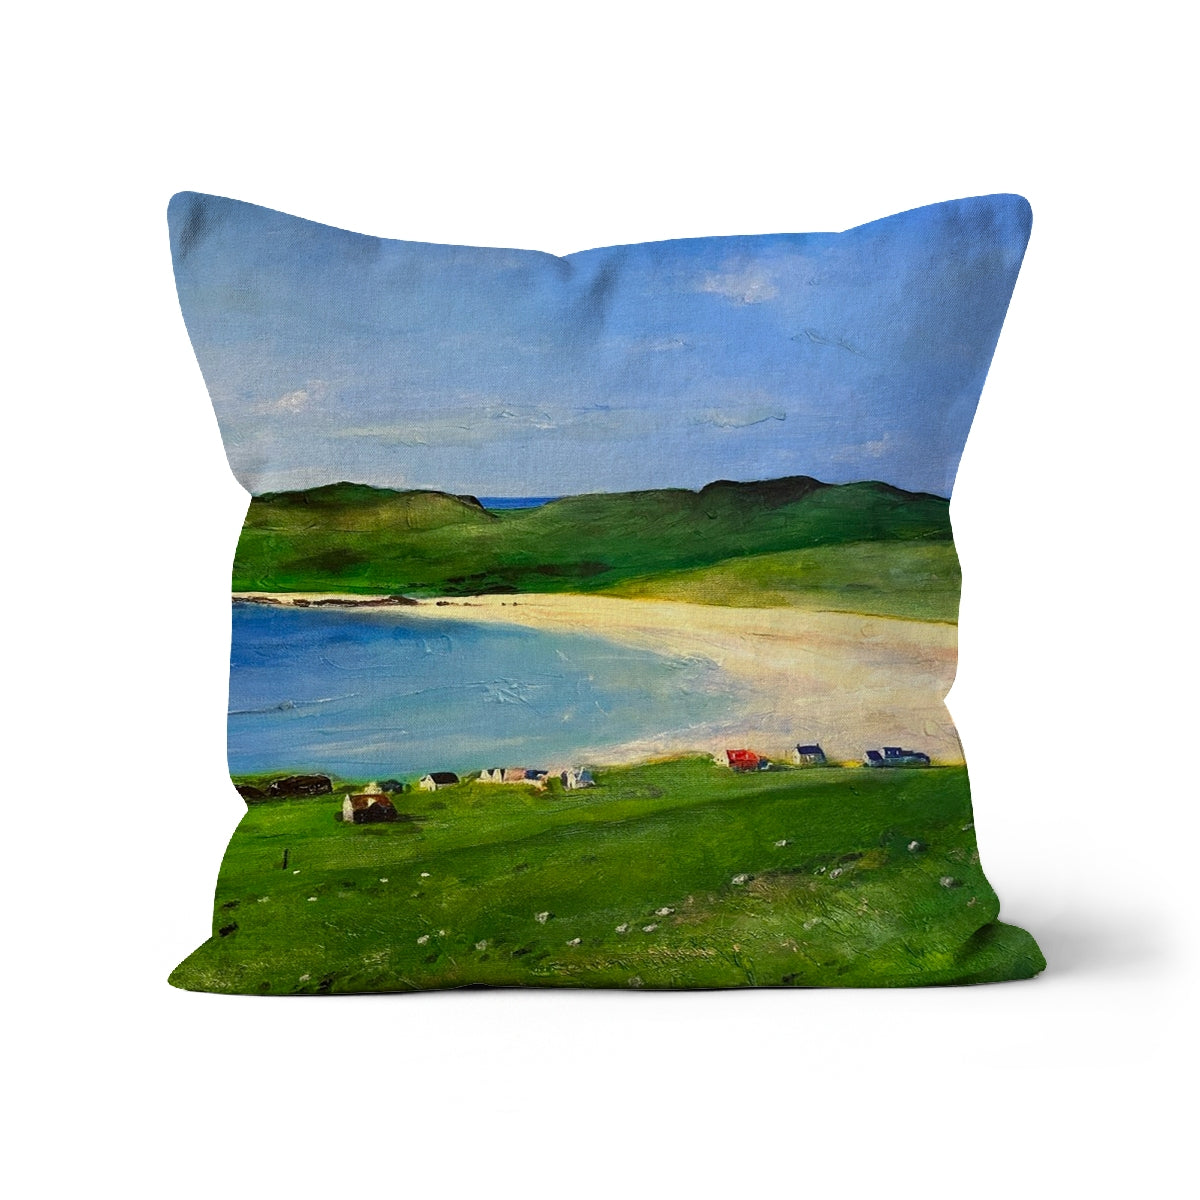 Balephuil Beach Tiree Art Gifts Cushion-Cushions-Hebridean Islands Art Gallery-Canvas-24"x24"-Paintings, Prints, Homeware, Art Gifts From Scotland By Scottish Artist Kevin Hunter